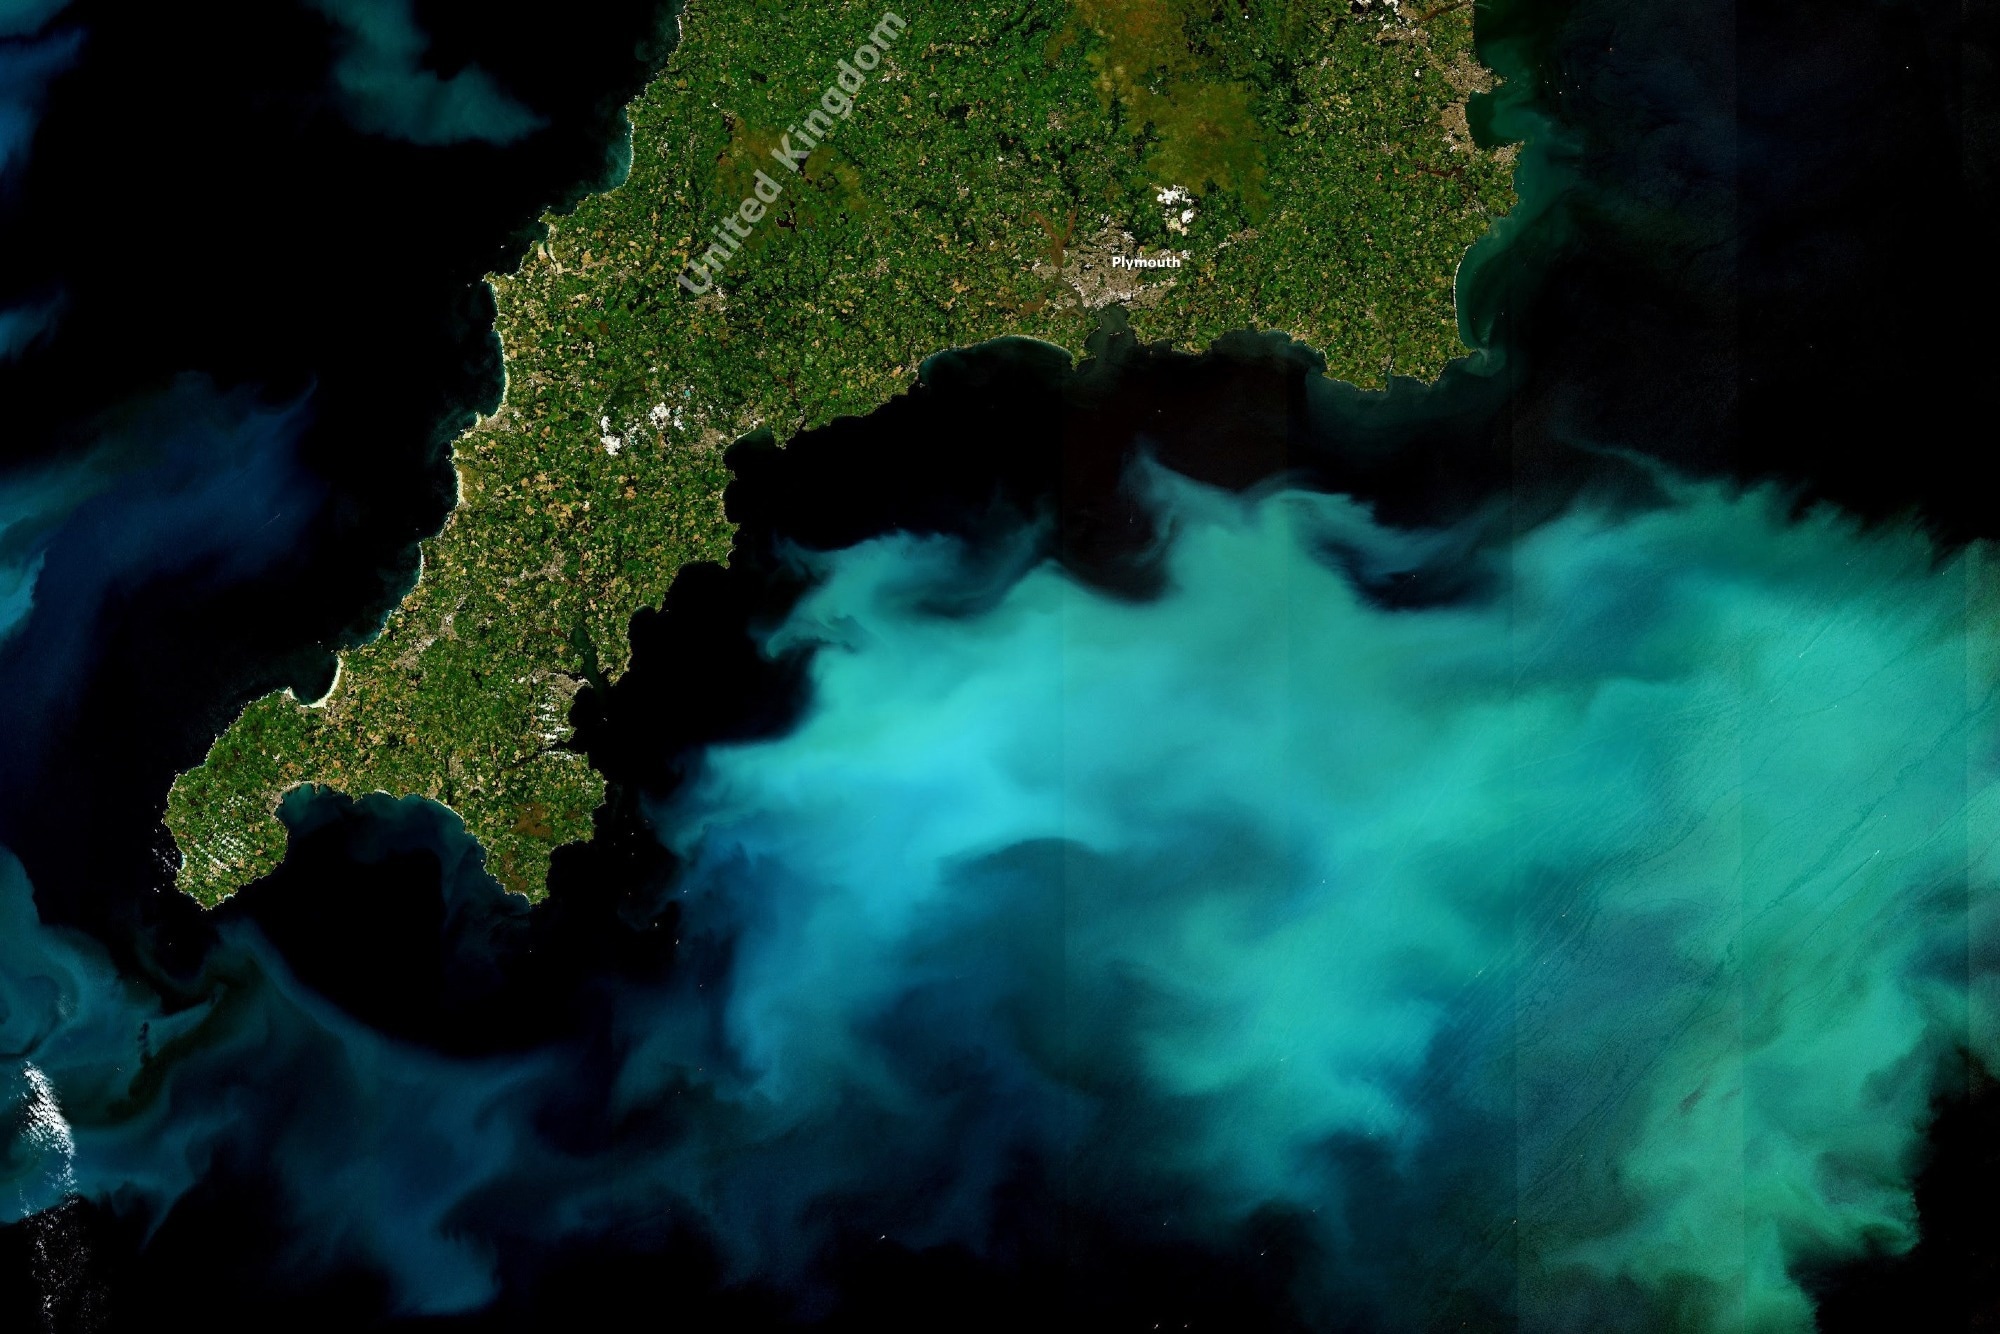 Australia Joins With the UK to Deliver Large-Scale Water Quality Monitoring From Space